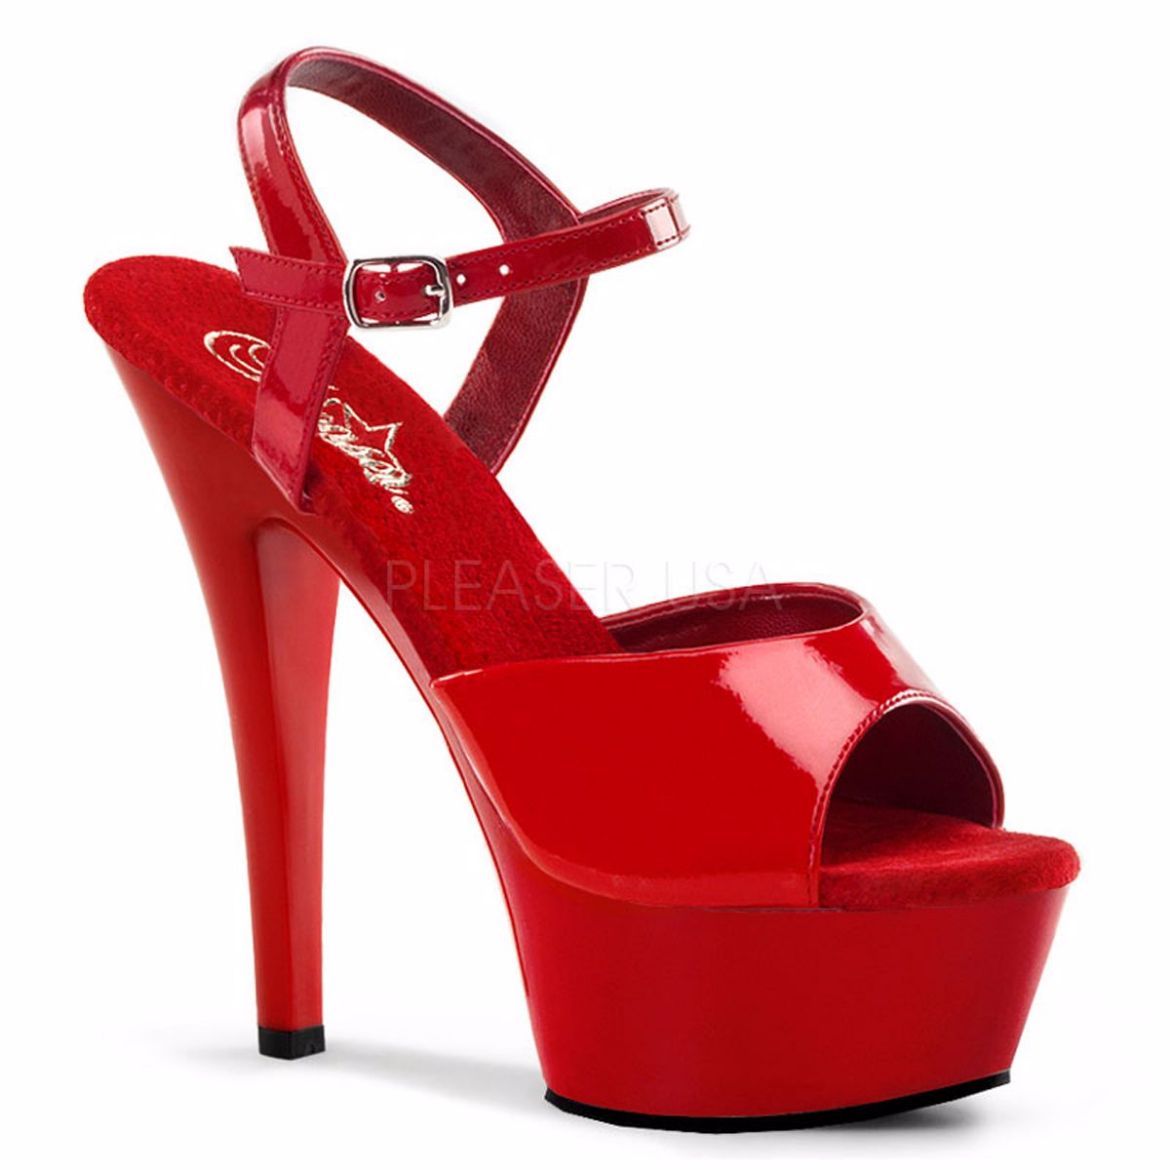 Inch Pleaser Heel KISS-201 Clear Sandals With Red Platform, 41% OFF